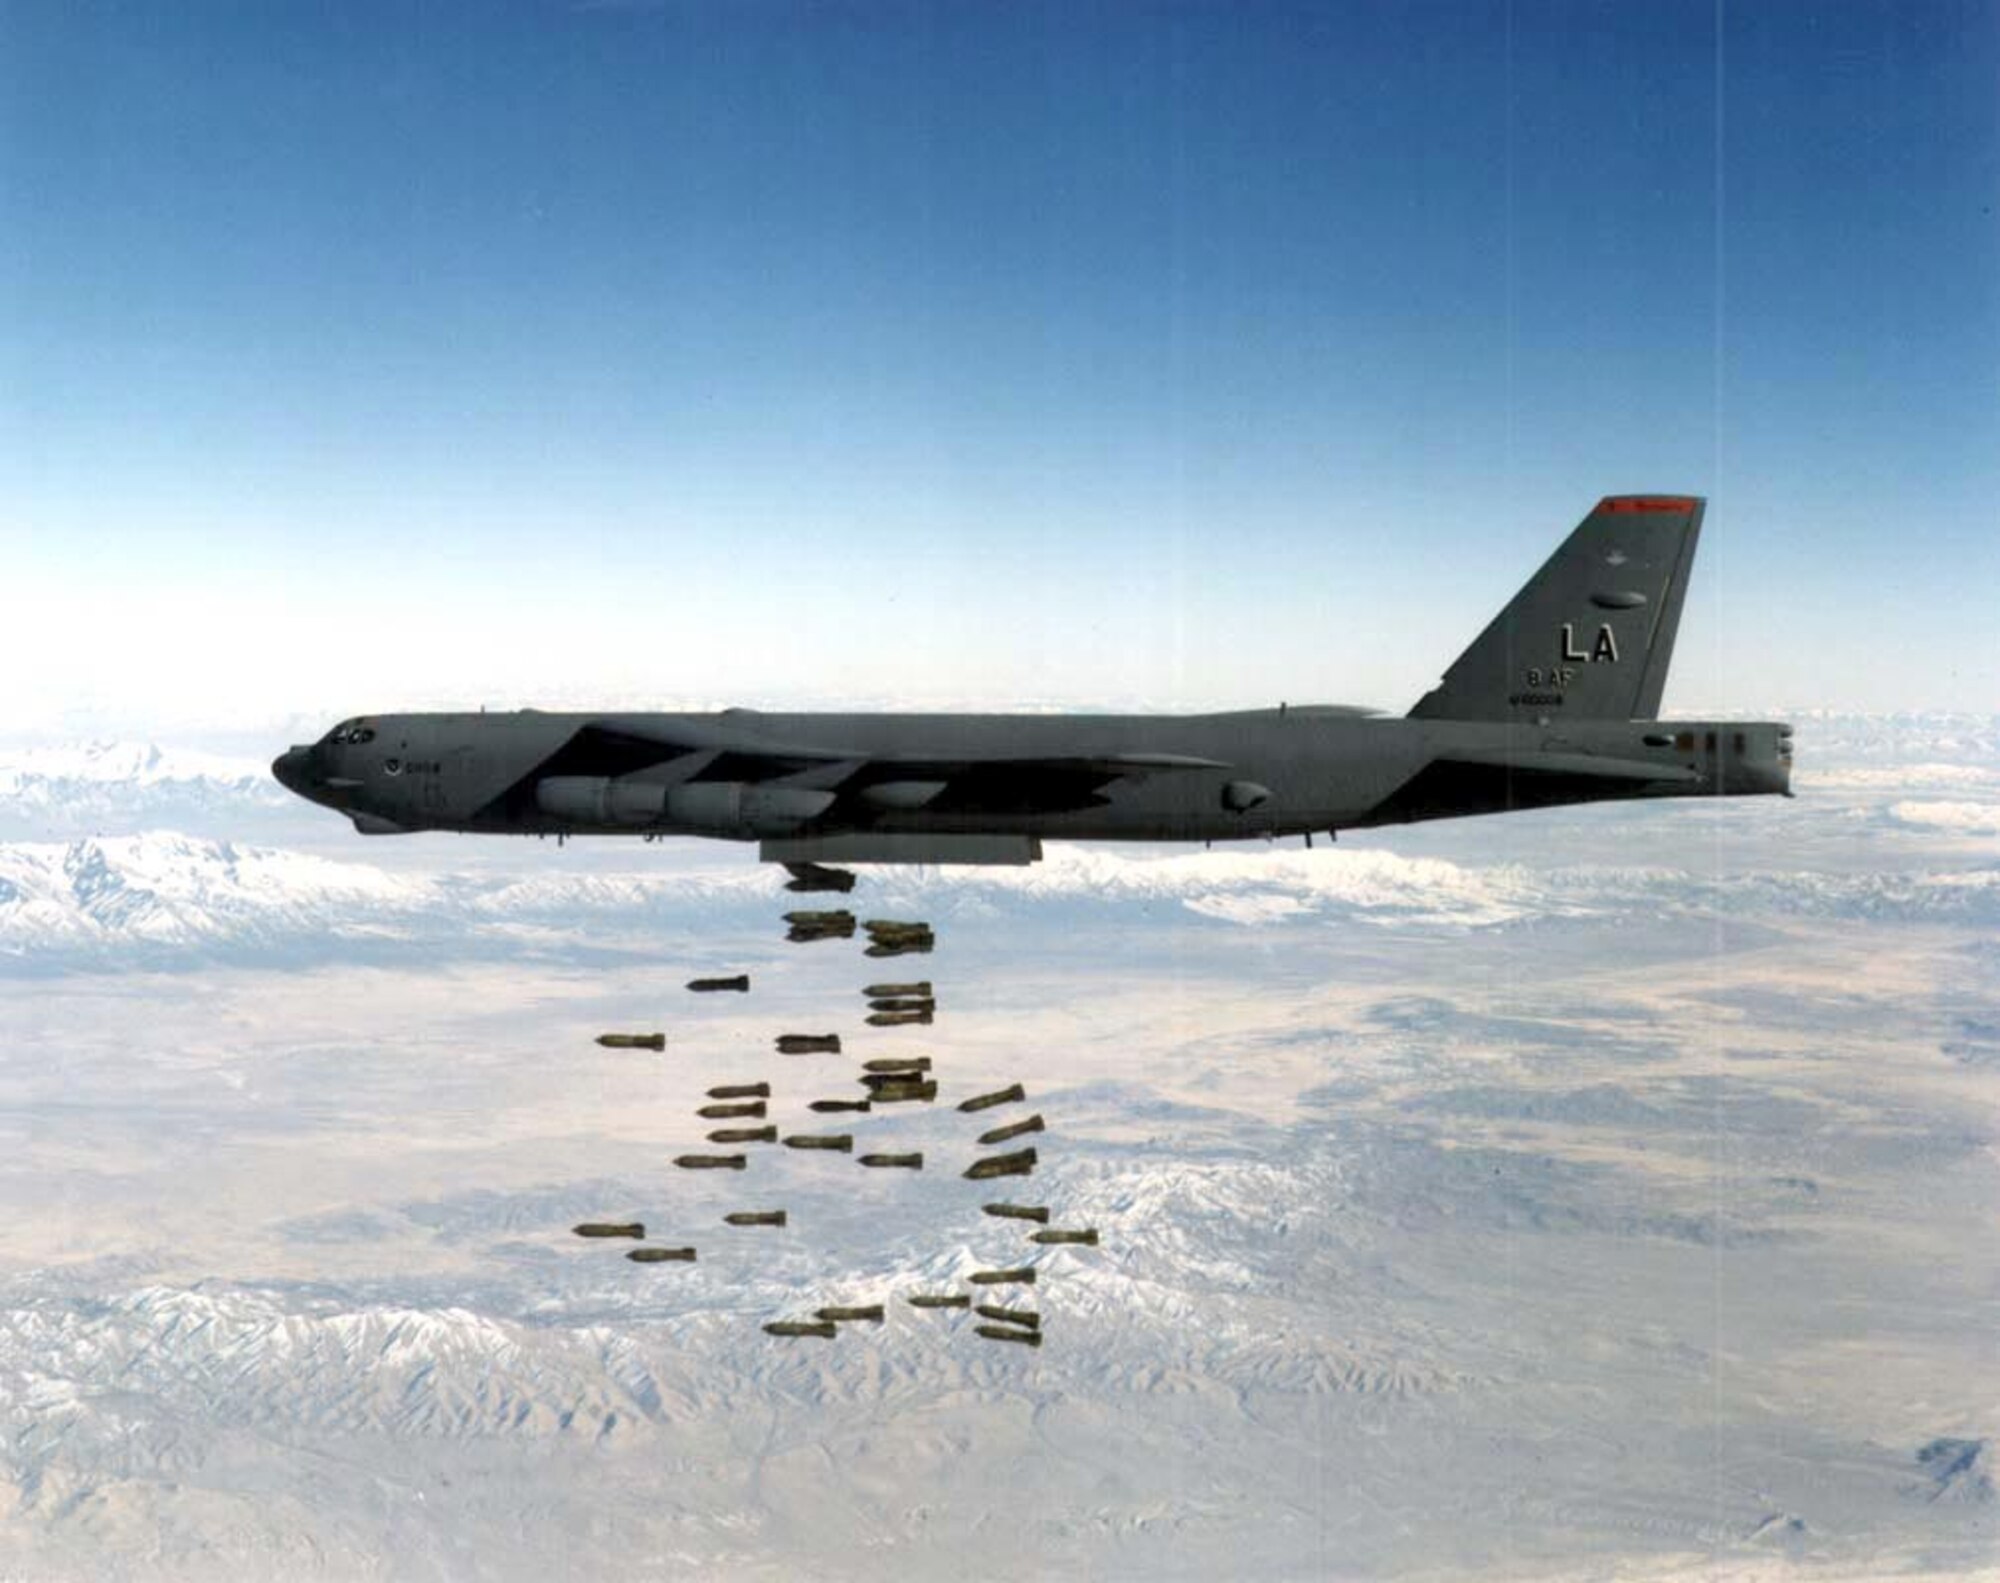 OVER NEVADA -- A B-52H Stratofortress drops a load of M-117 750-pound bombs during a training run here. During Desert Storm, B-52s delivered 40 percent of all the weapons dropped by coalition forces. The first Gulf War saw the longest strike mission in the history of aerial warfare when B-52s took off from Barksdale Air Force Base, La., launched conventional air-launched cruise missiles and returned to Barksdale -- a 35-hour, non-stop combat mission. (U.S. Air Force photo)